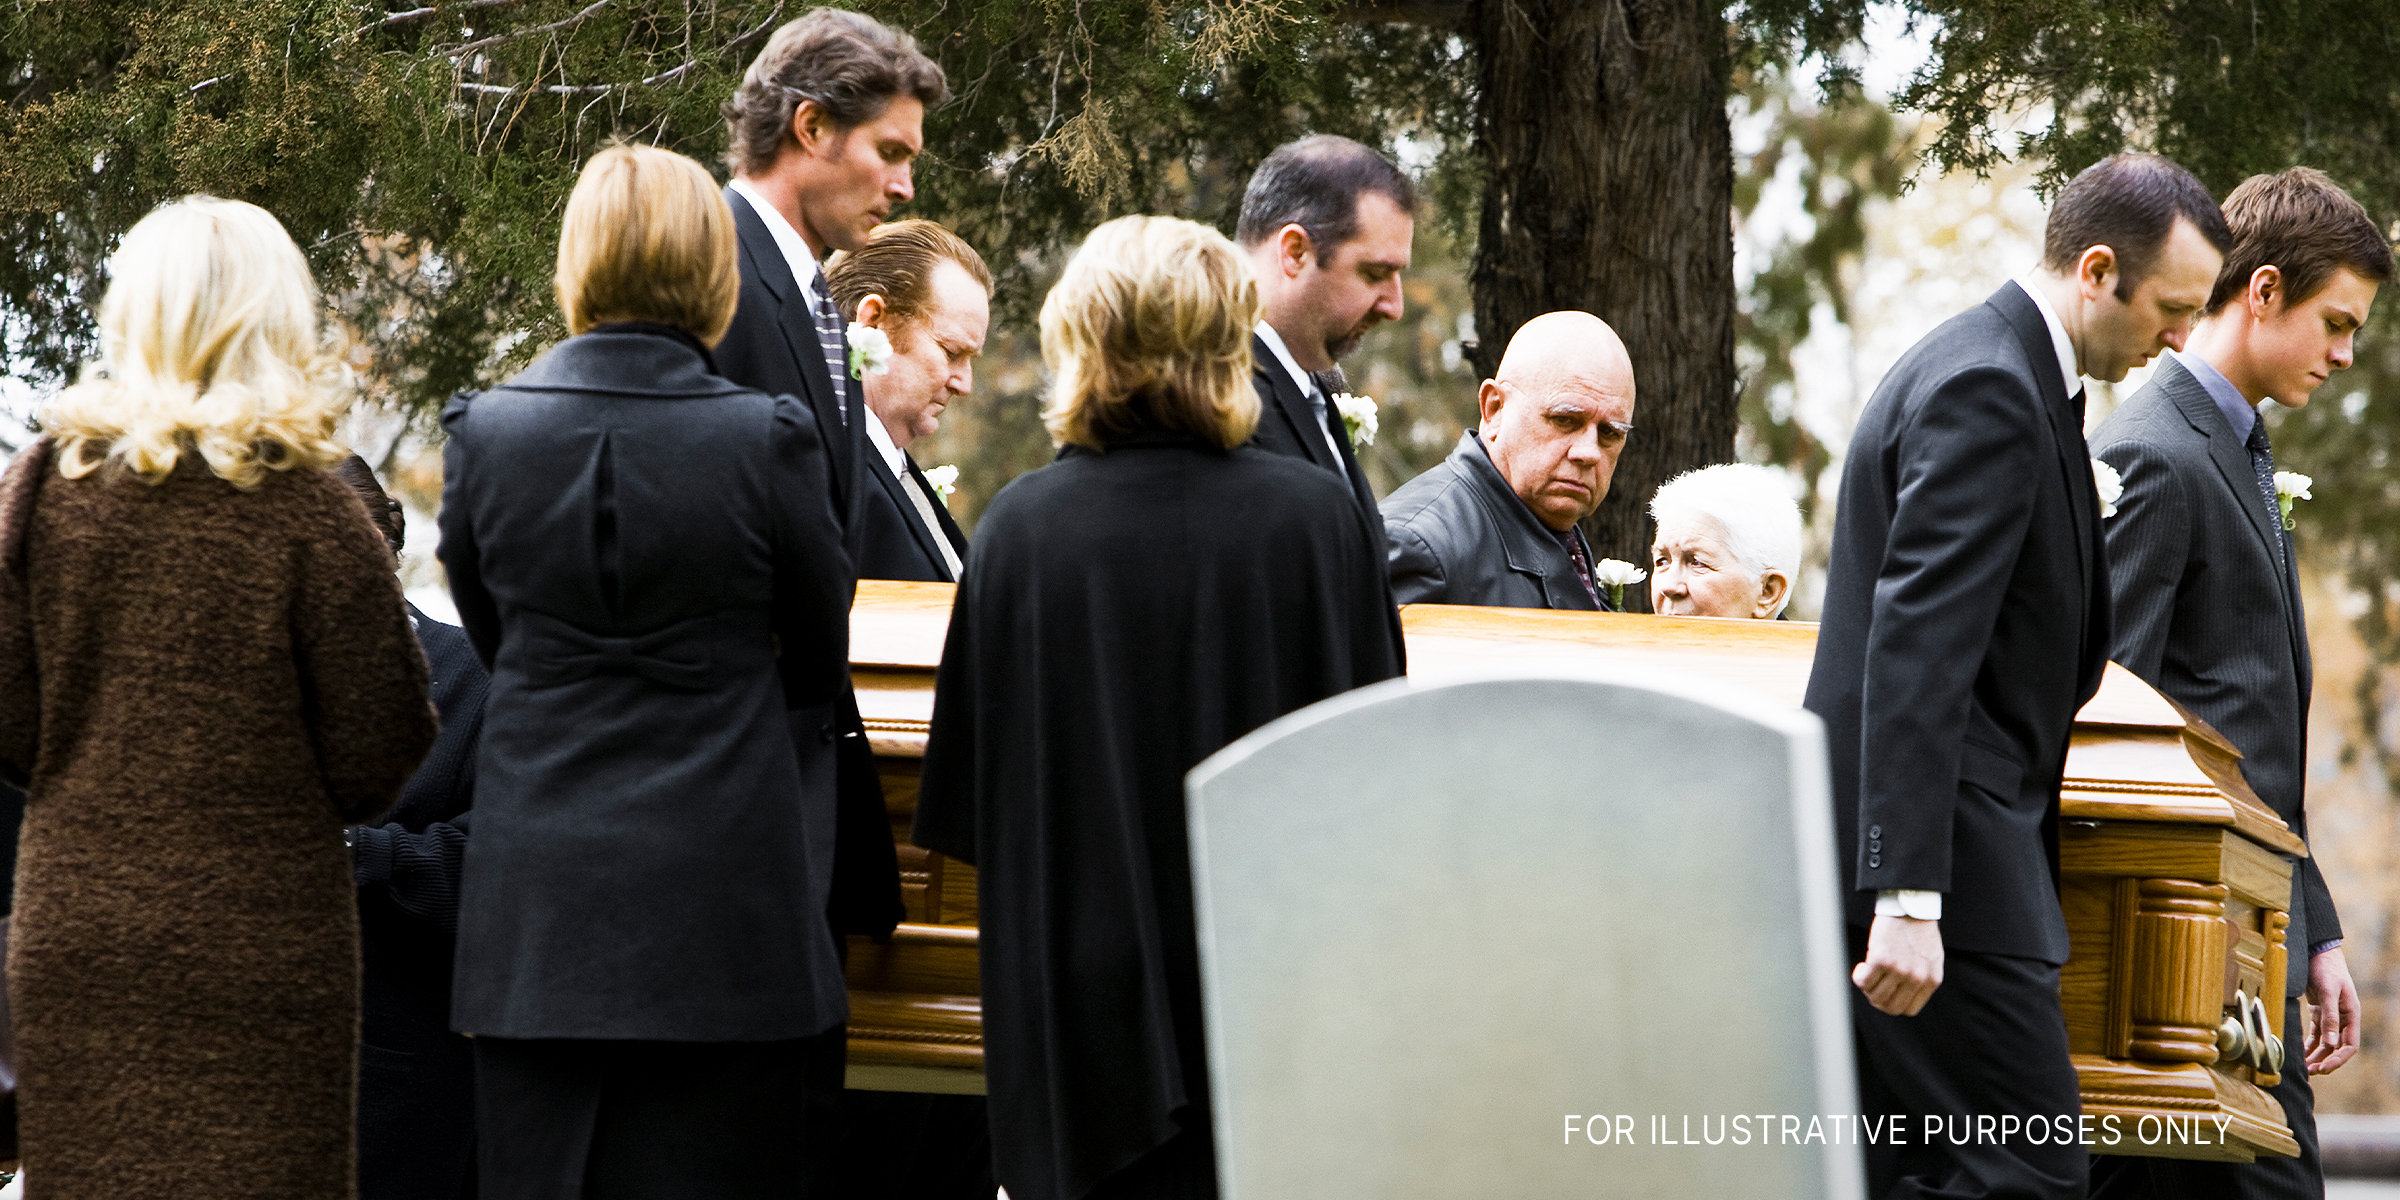 People at a funeral | Source: Getty Images